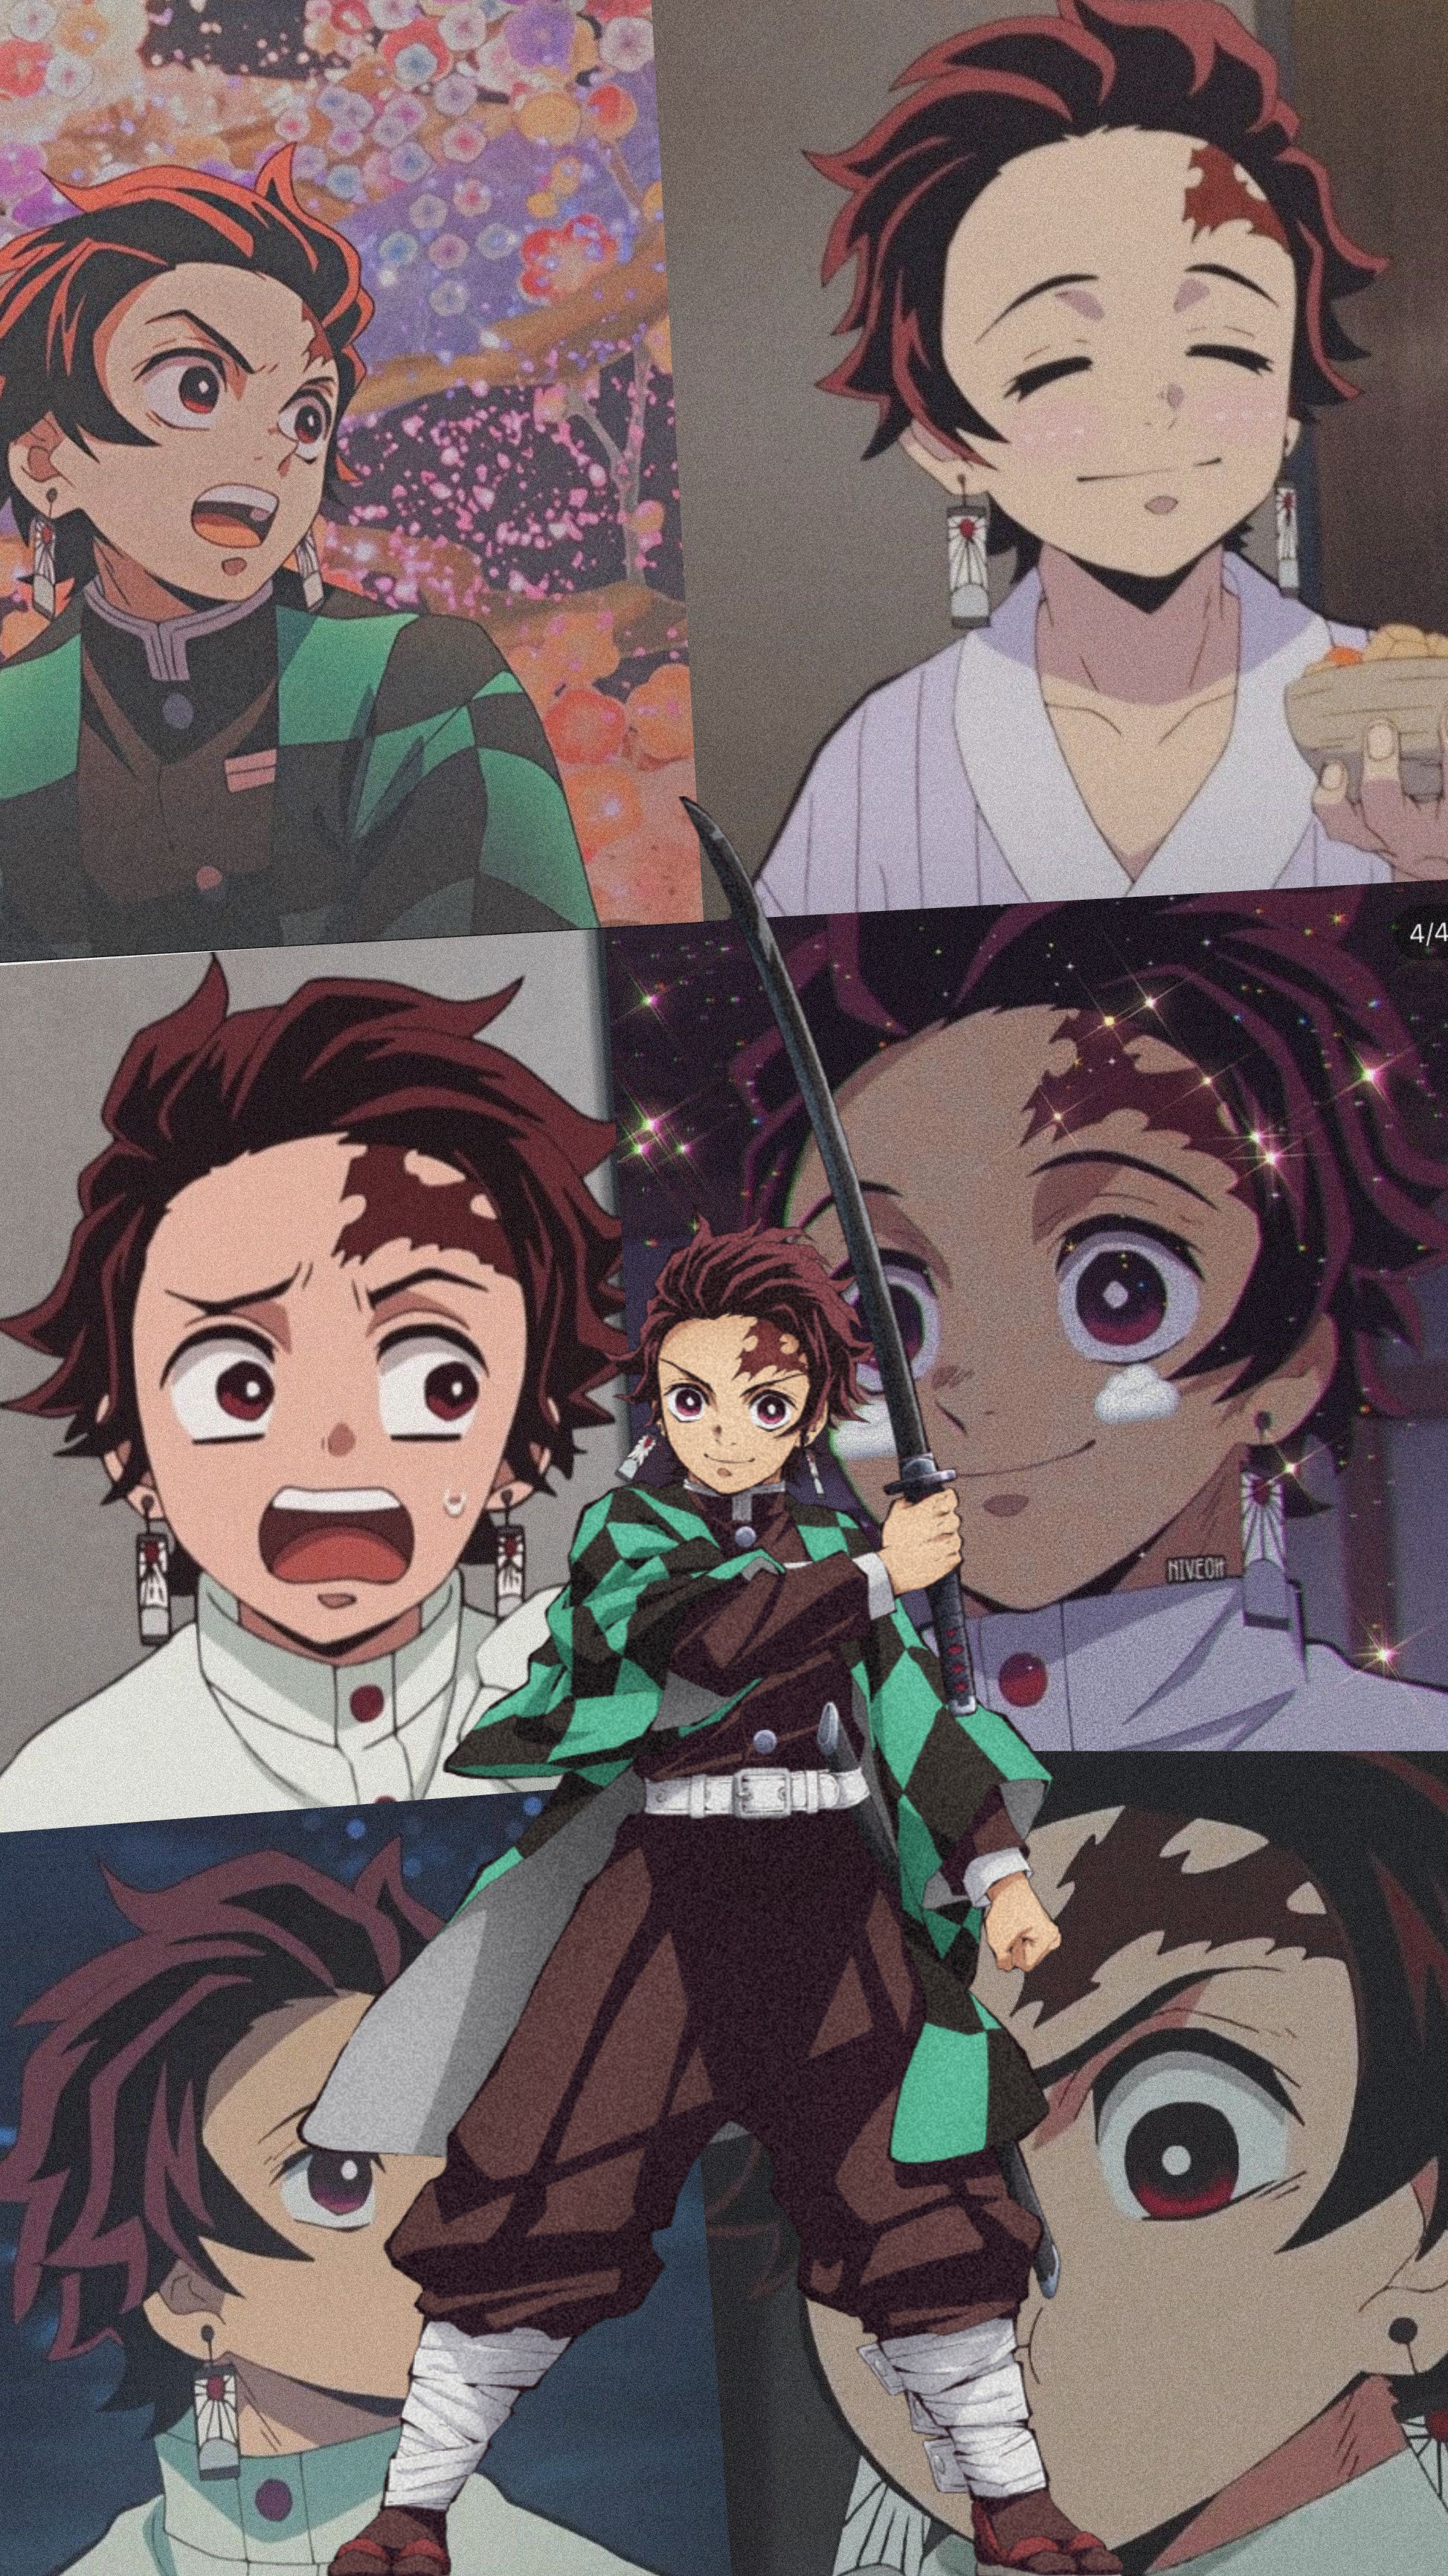 A collage of Tanjiro from Demon Slayer with various expressions and emotions - Tanjiro Kamado